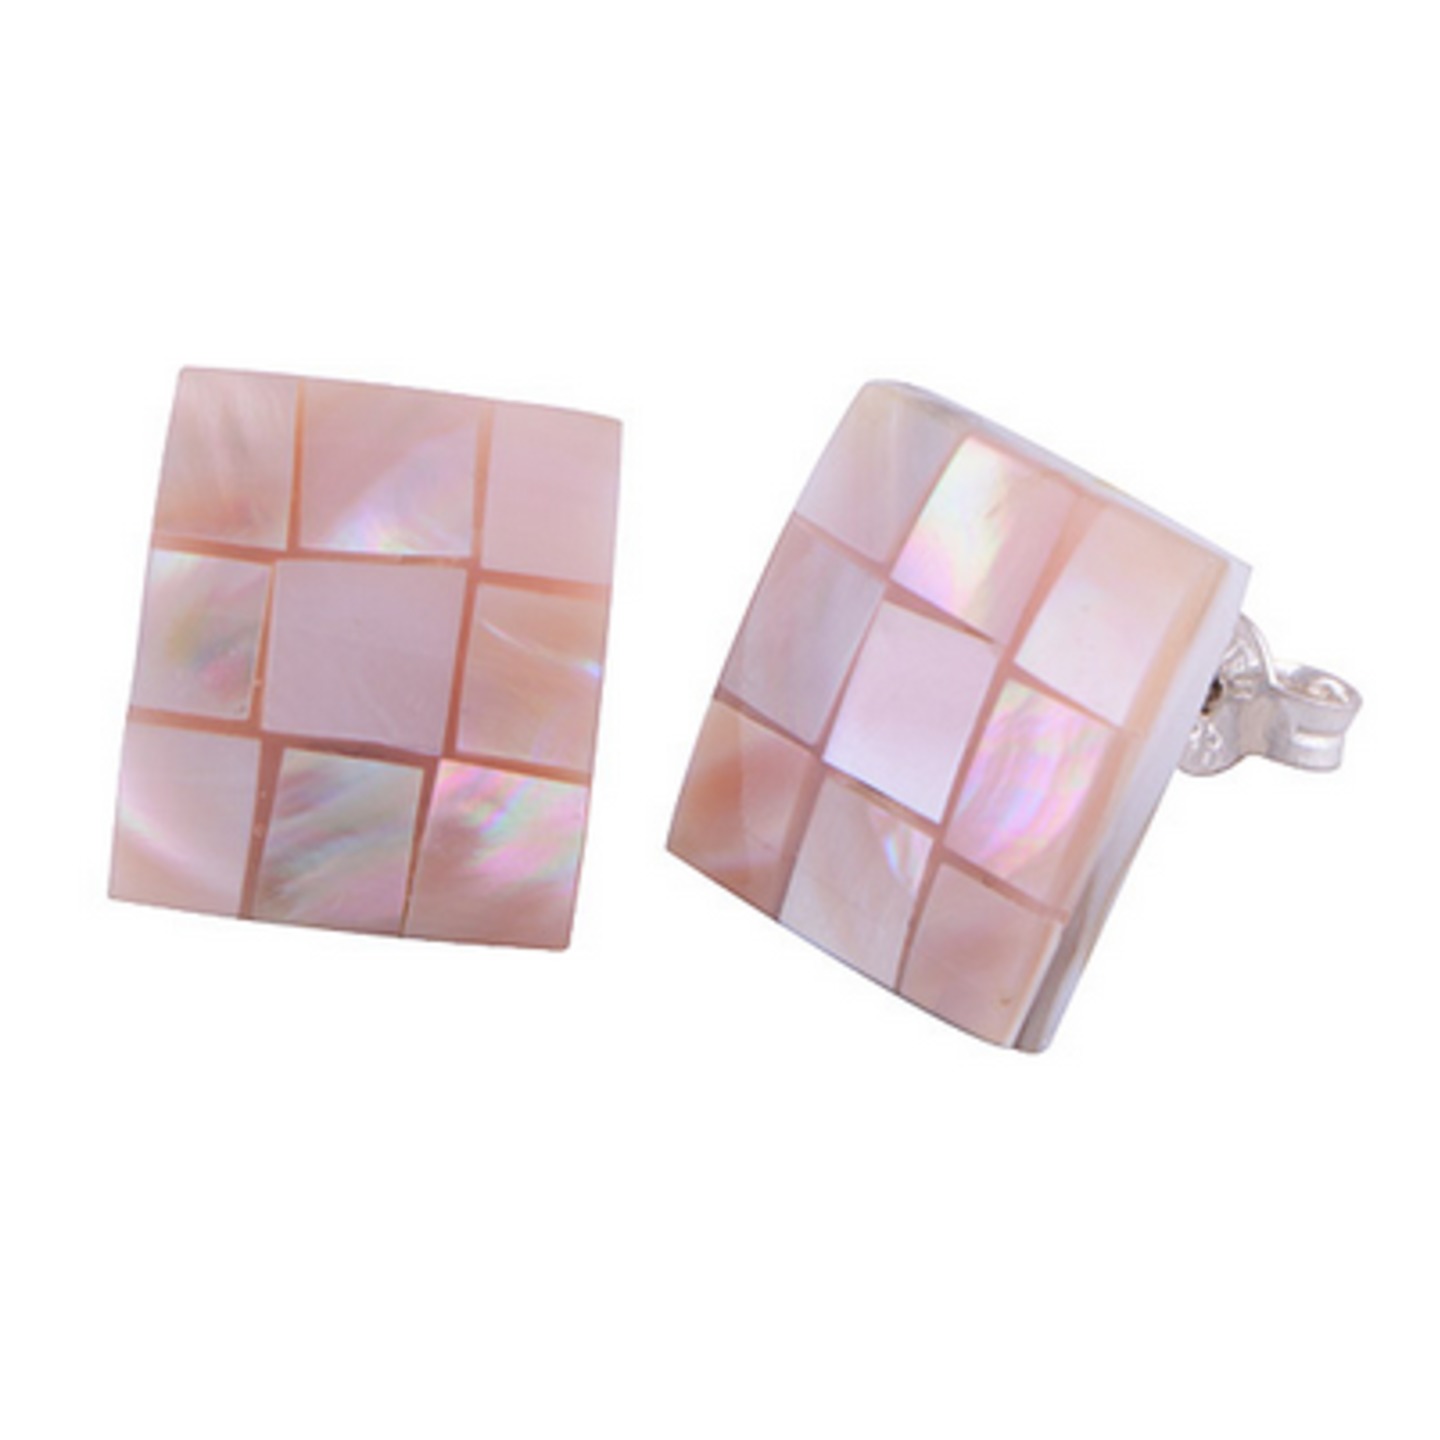 The Pink Reflection Shell Silver Studs